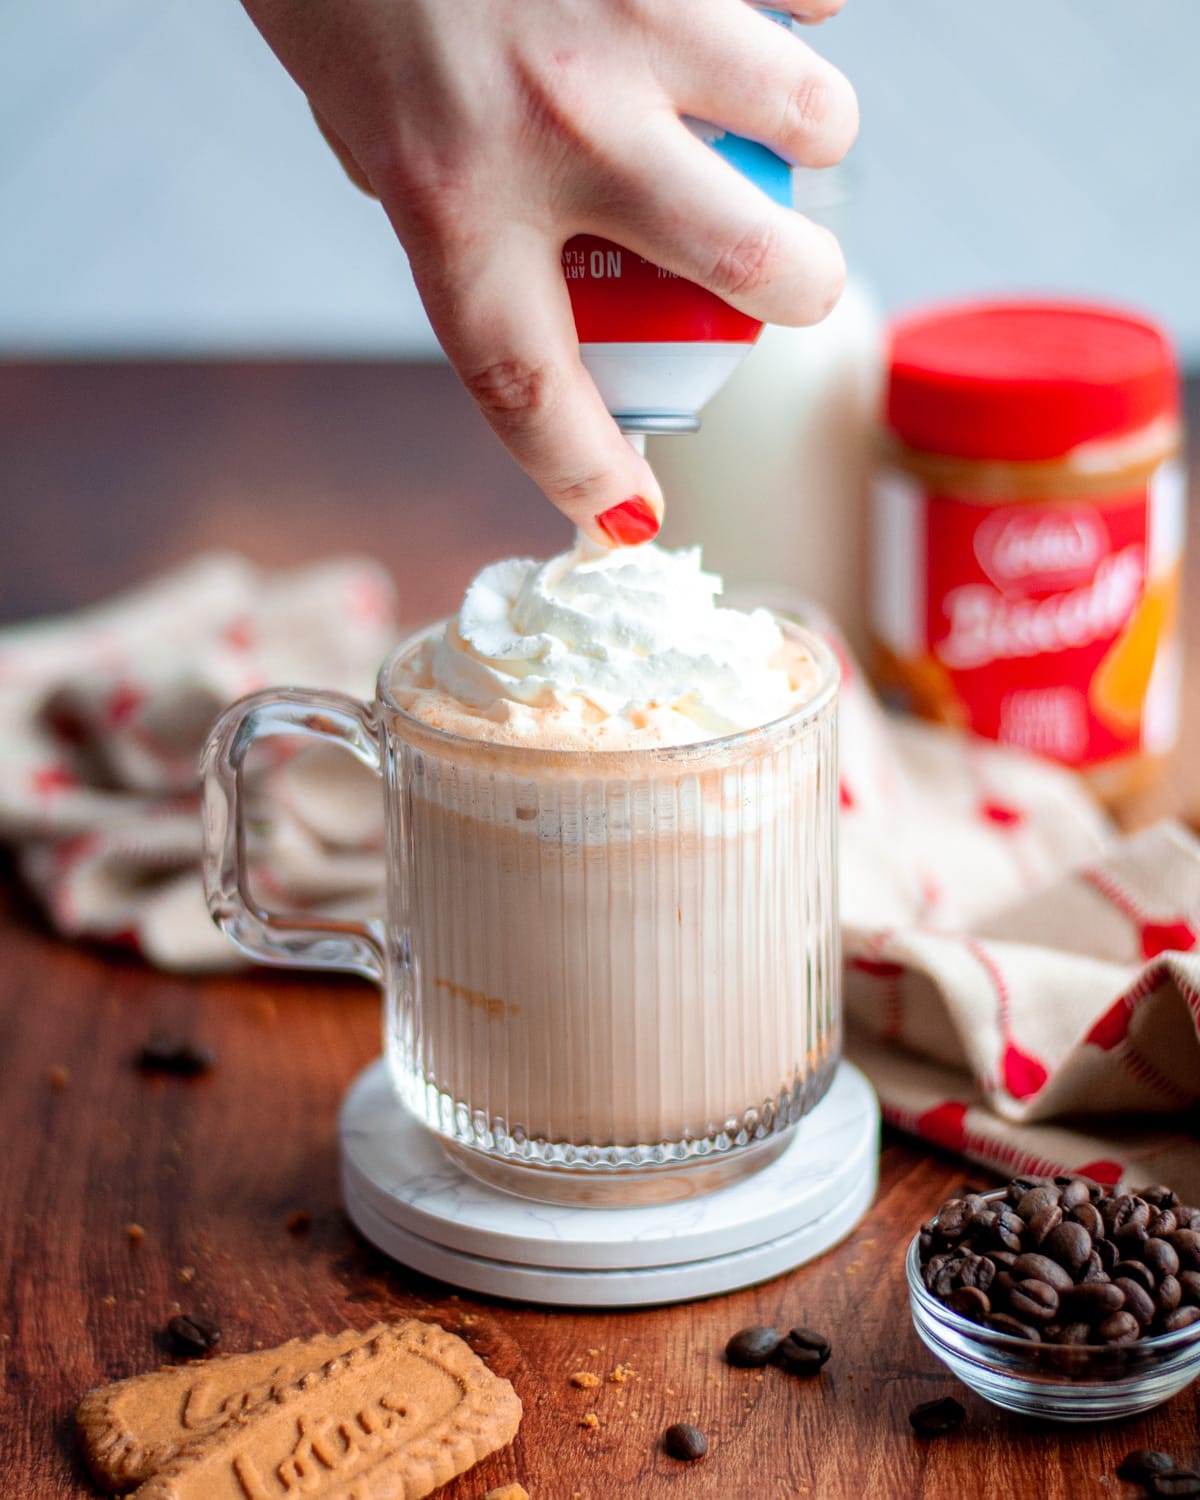 process shot showing whipped cream being added on top of the cookie butter latte. the mug sits on top of 2 white coasters and is surrounded by a tan and red linen, lotus biscoff cookies, and coffee beans. a container of milk and the jar of cookie butter sit in the background.